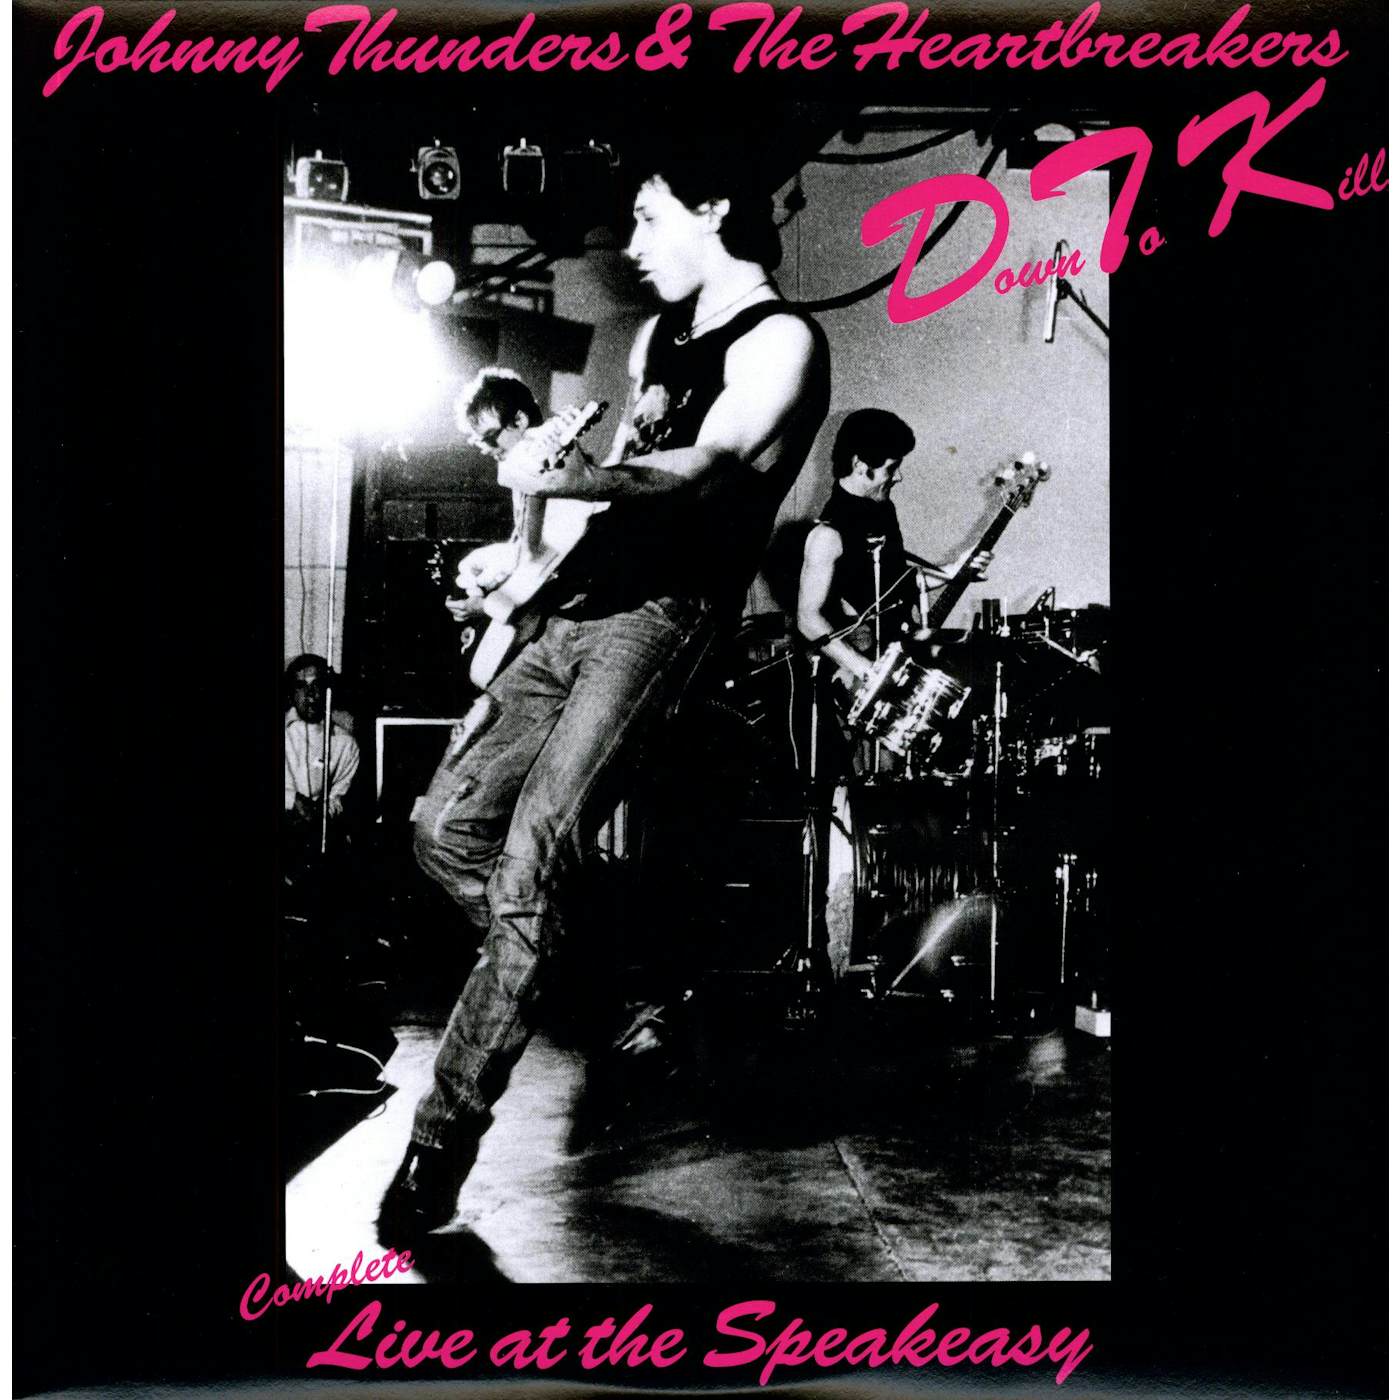 Johnny Thunders & The Heartbreakers DOWN TO KILL: THE COMPLETE LIVE AT THE SPEAKEASY Vinyl Record